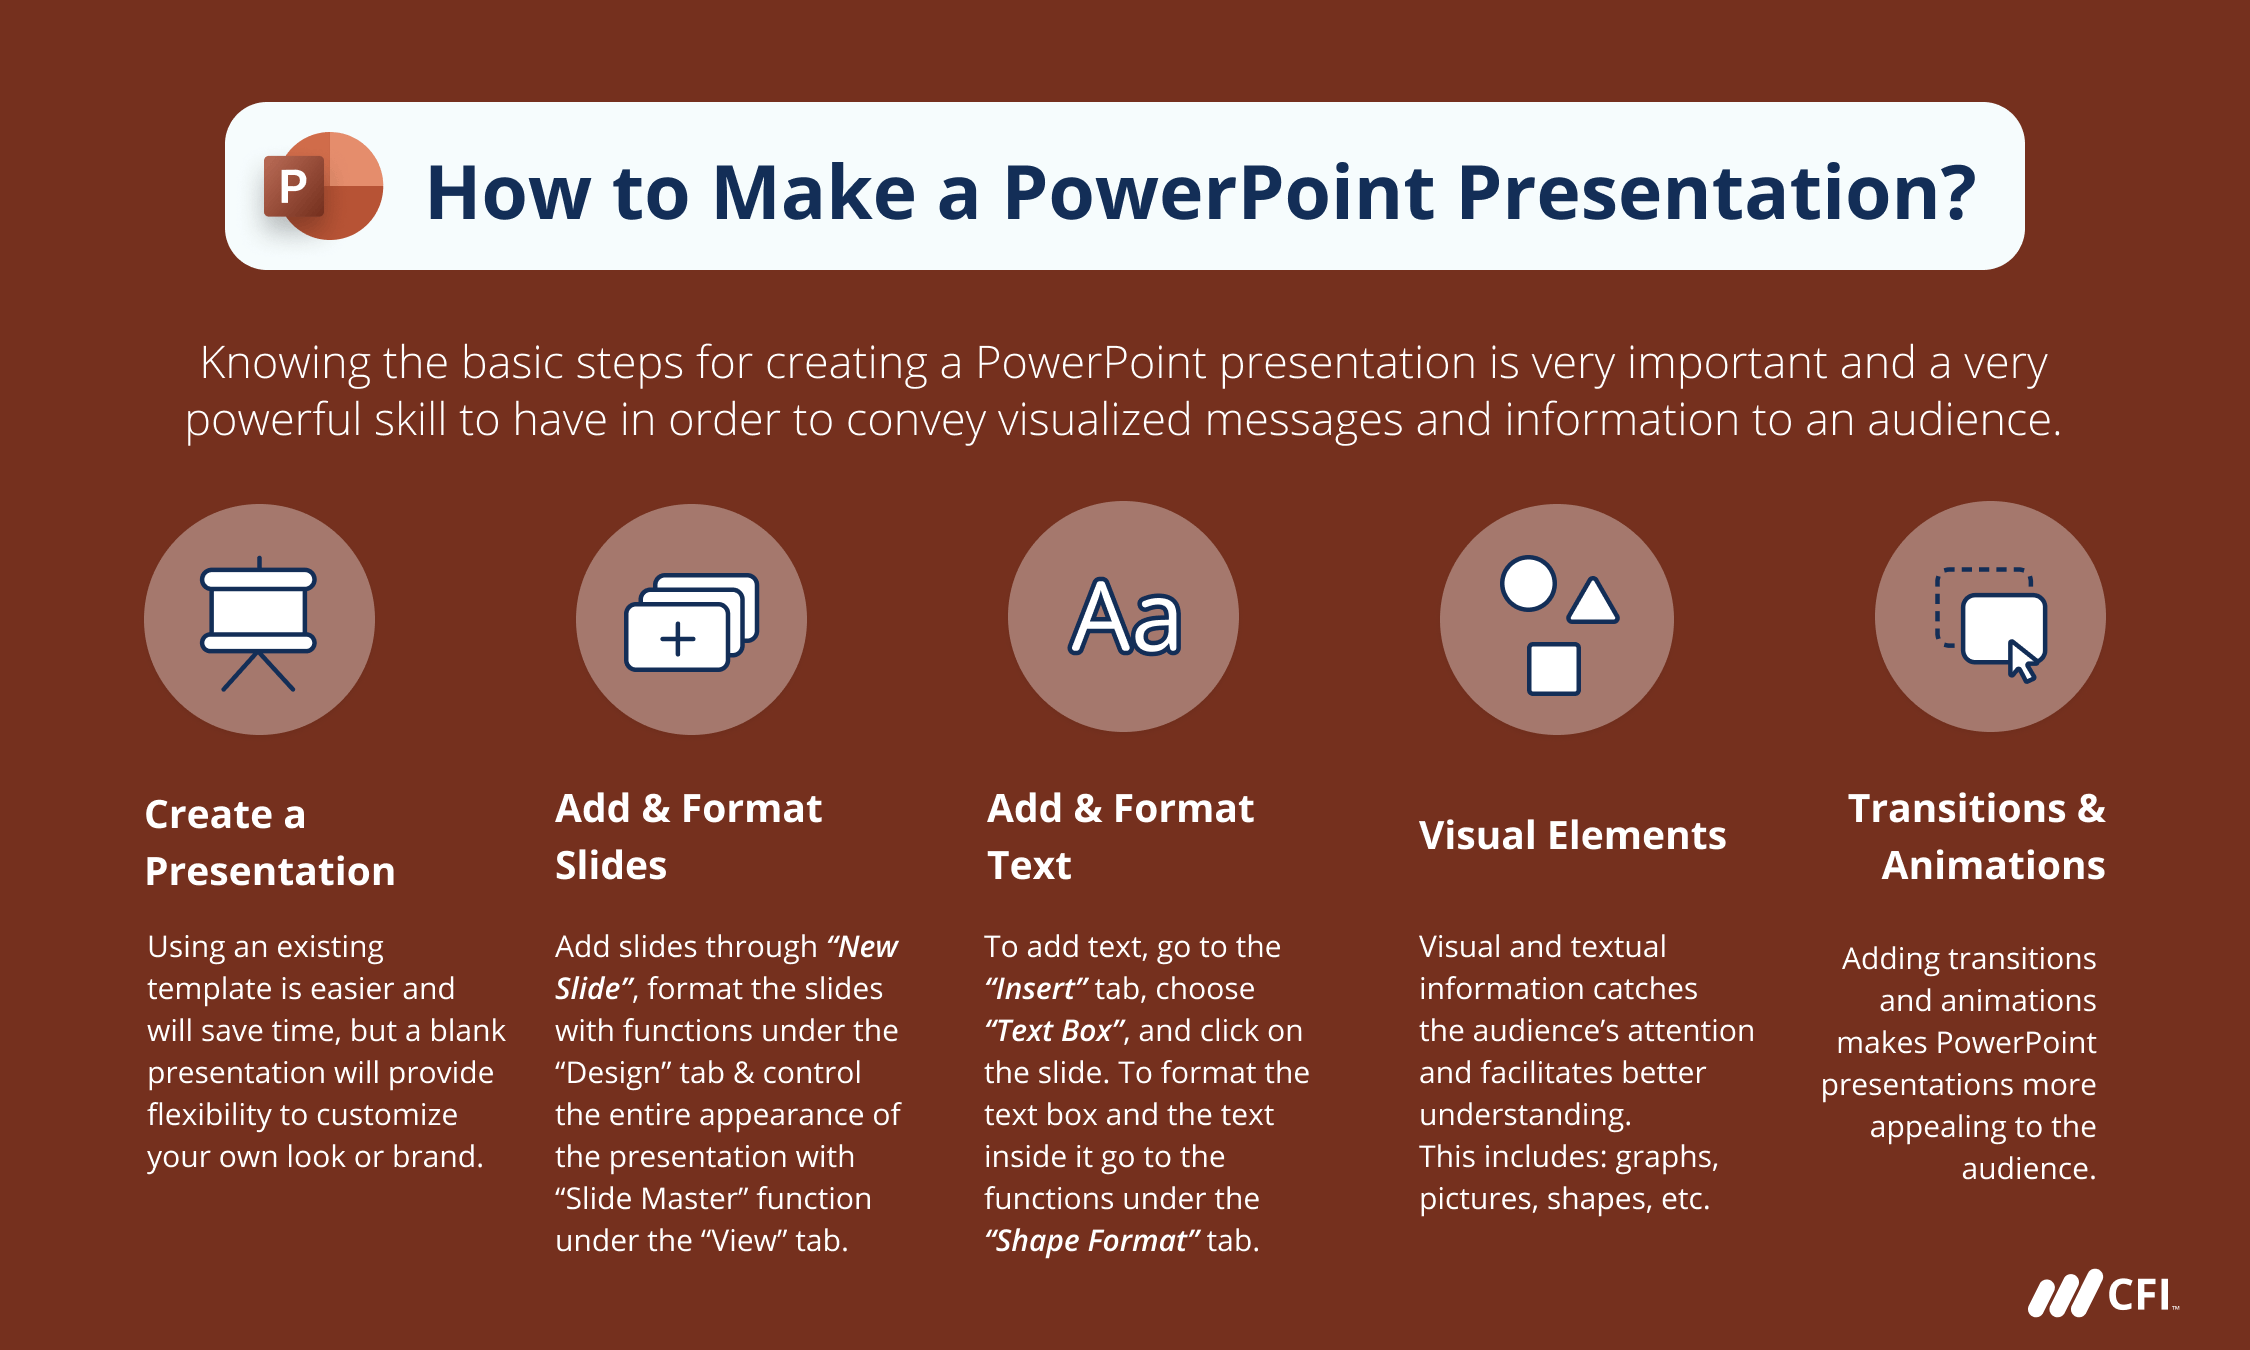 How to Make a PowerPoint Presentation? - Overview, Steps